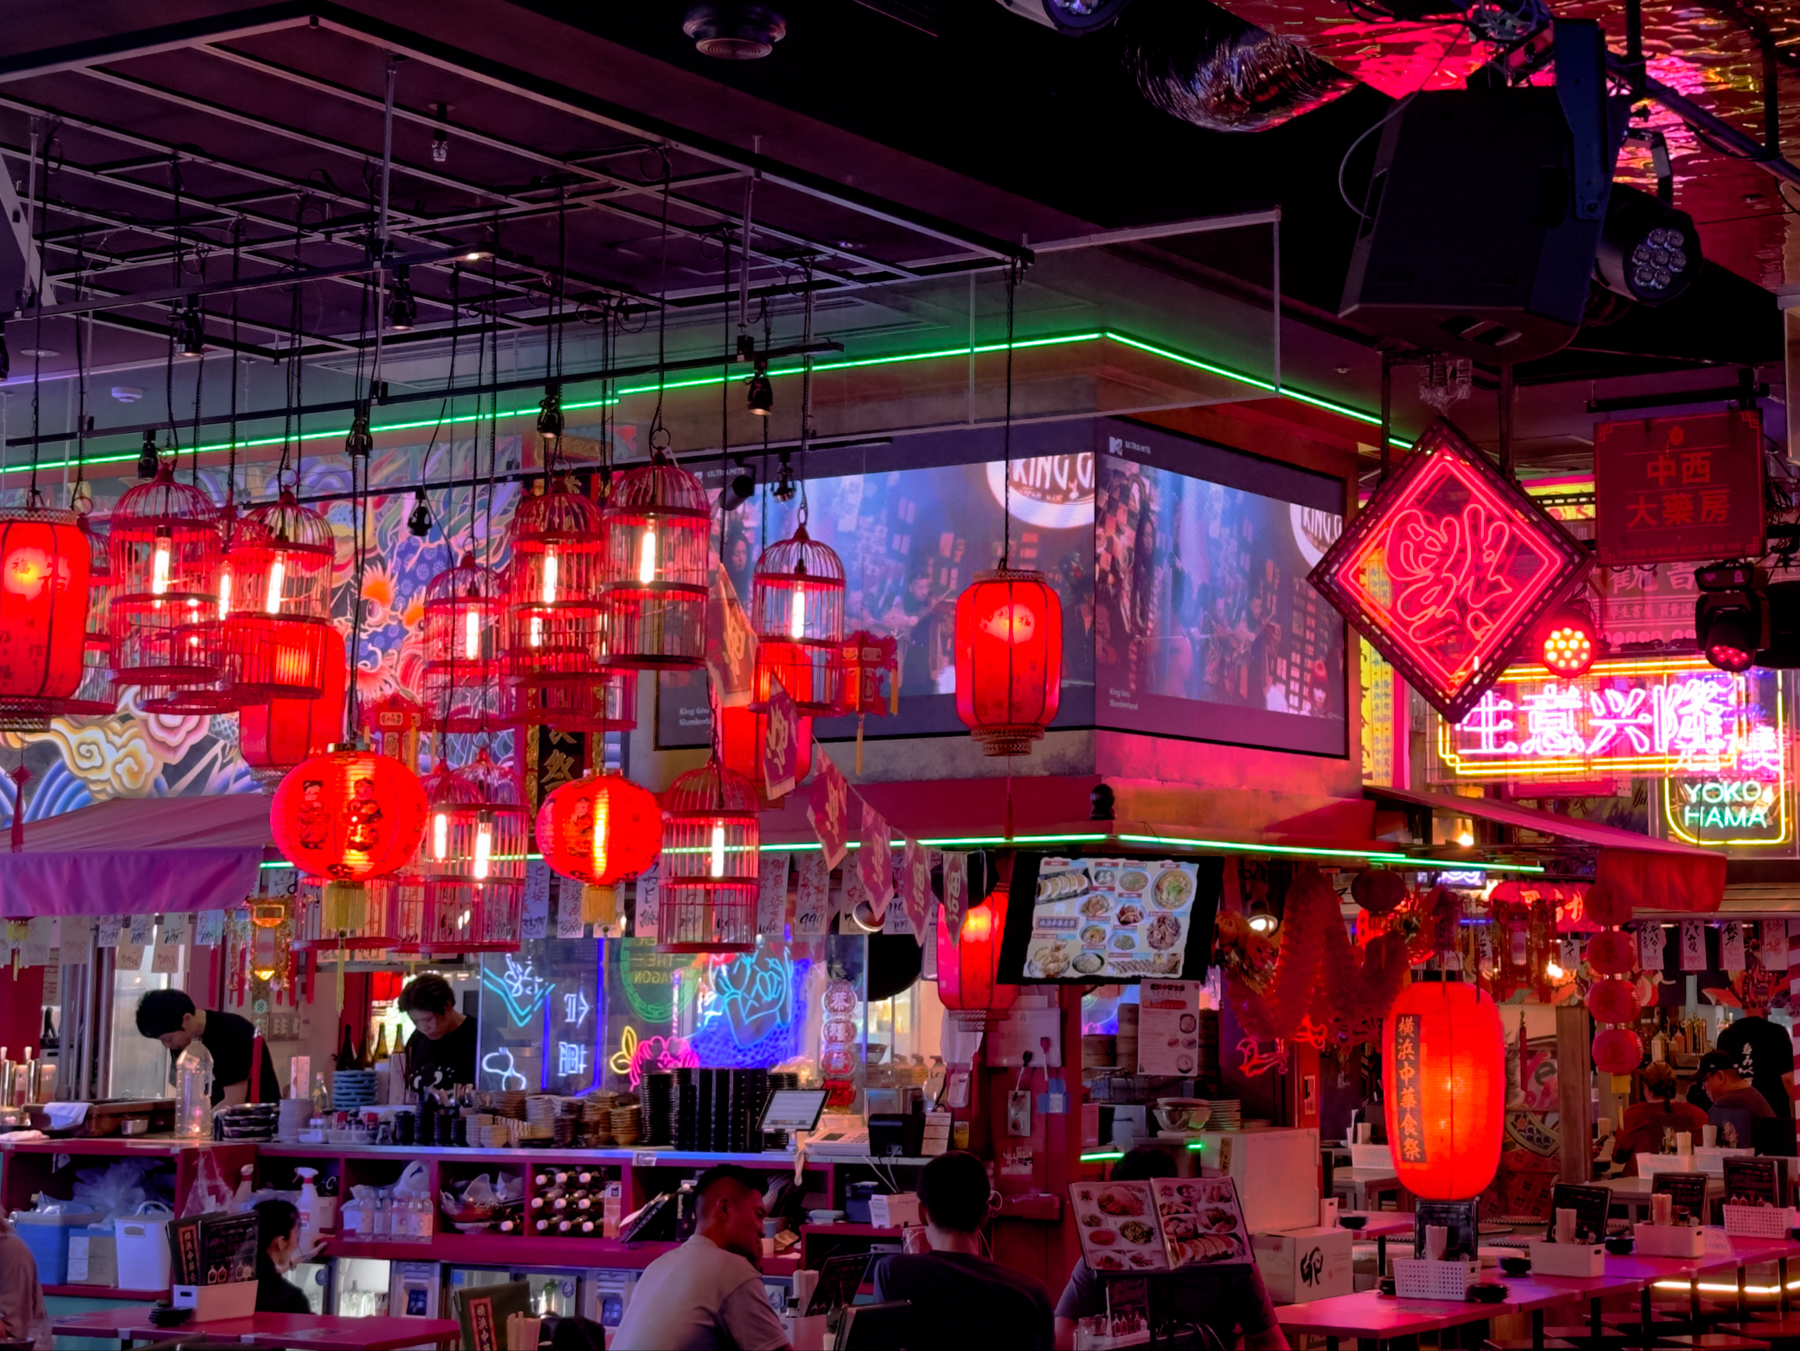 The colourful neon interior of the restaurants in Kabuchicho Tower